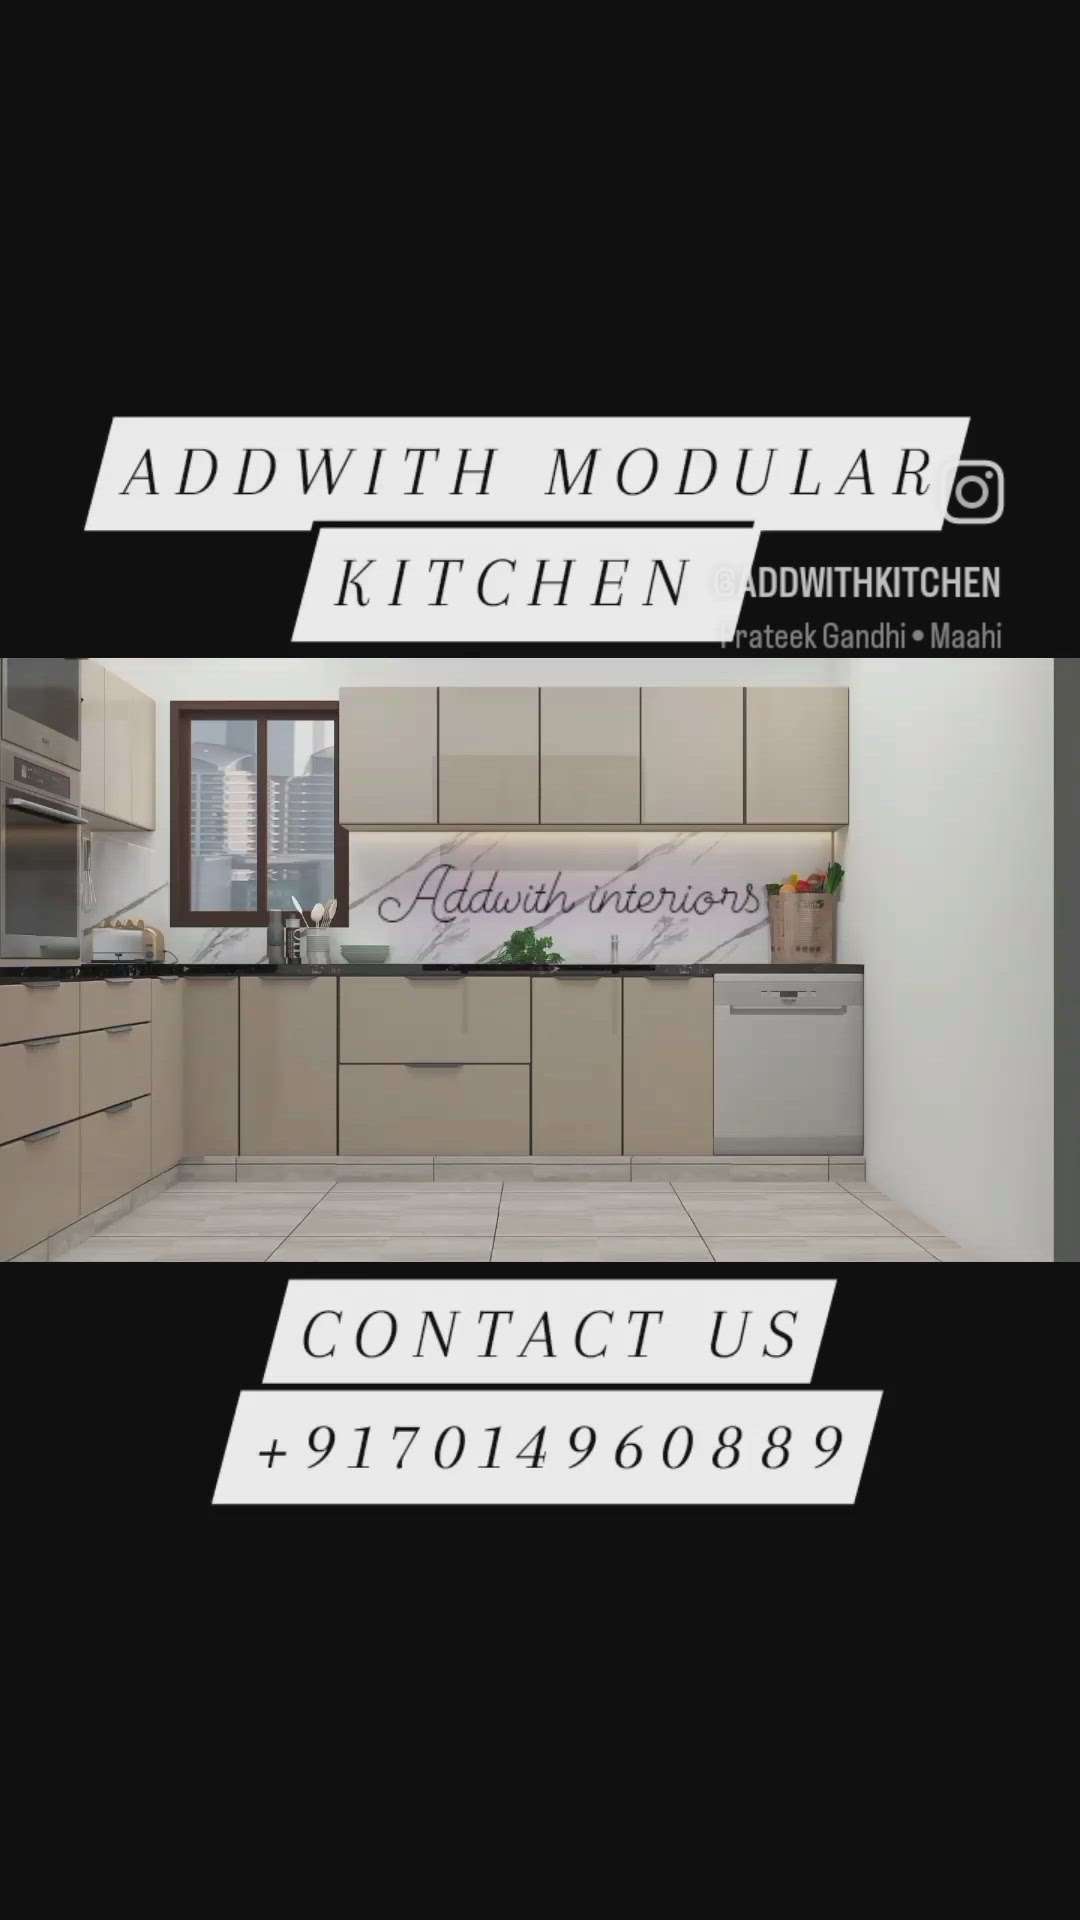 Addwith modular kitchen design for UK client at tirtharaj appartments civil lines jaipur. Contact us for your modular kitchen +917014960889
#3ddesign #kitchen3d #kitchendesign #kitchendesignideas #kitchenideas #modularkitchen #modularkitchenideas #modularkitchendesigns #interiors4you #interiordesignideas #interiorlovers #interior #addwithinterior #addwithkitchen #addwithmodularkitchen #Addwith #addwithhomes
#ModularKitchen #modularwardrobe #Modularfurniture #sofadesign